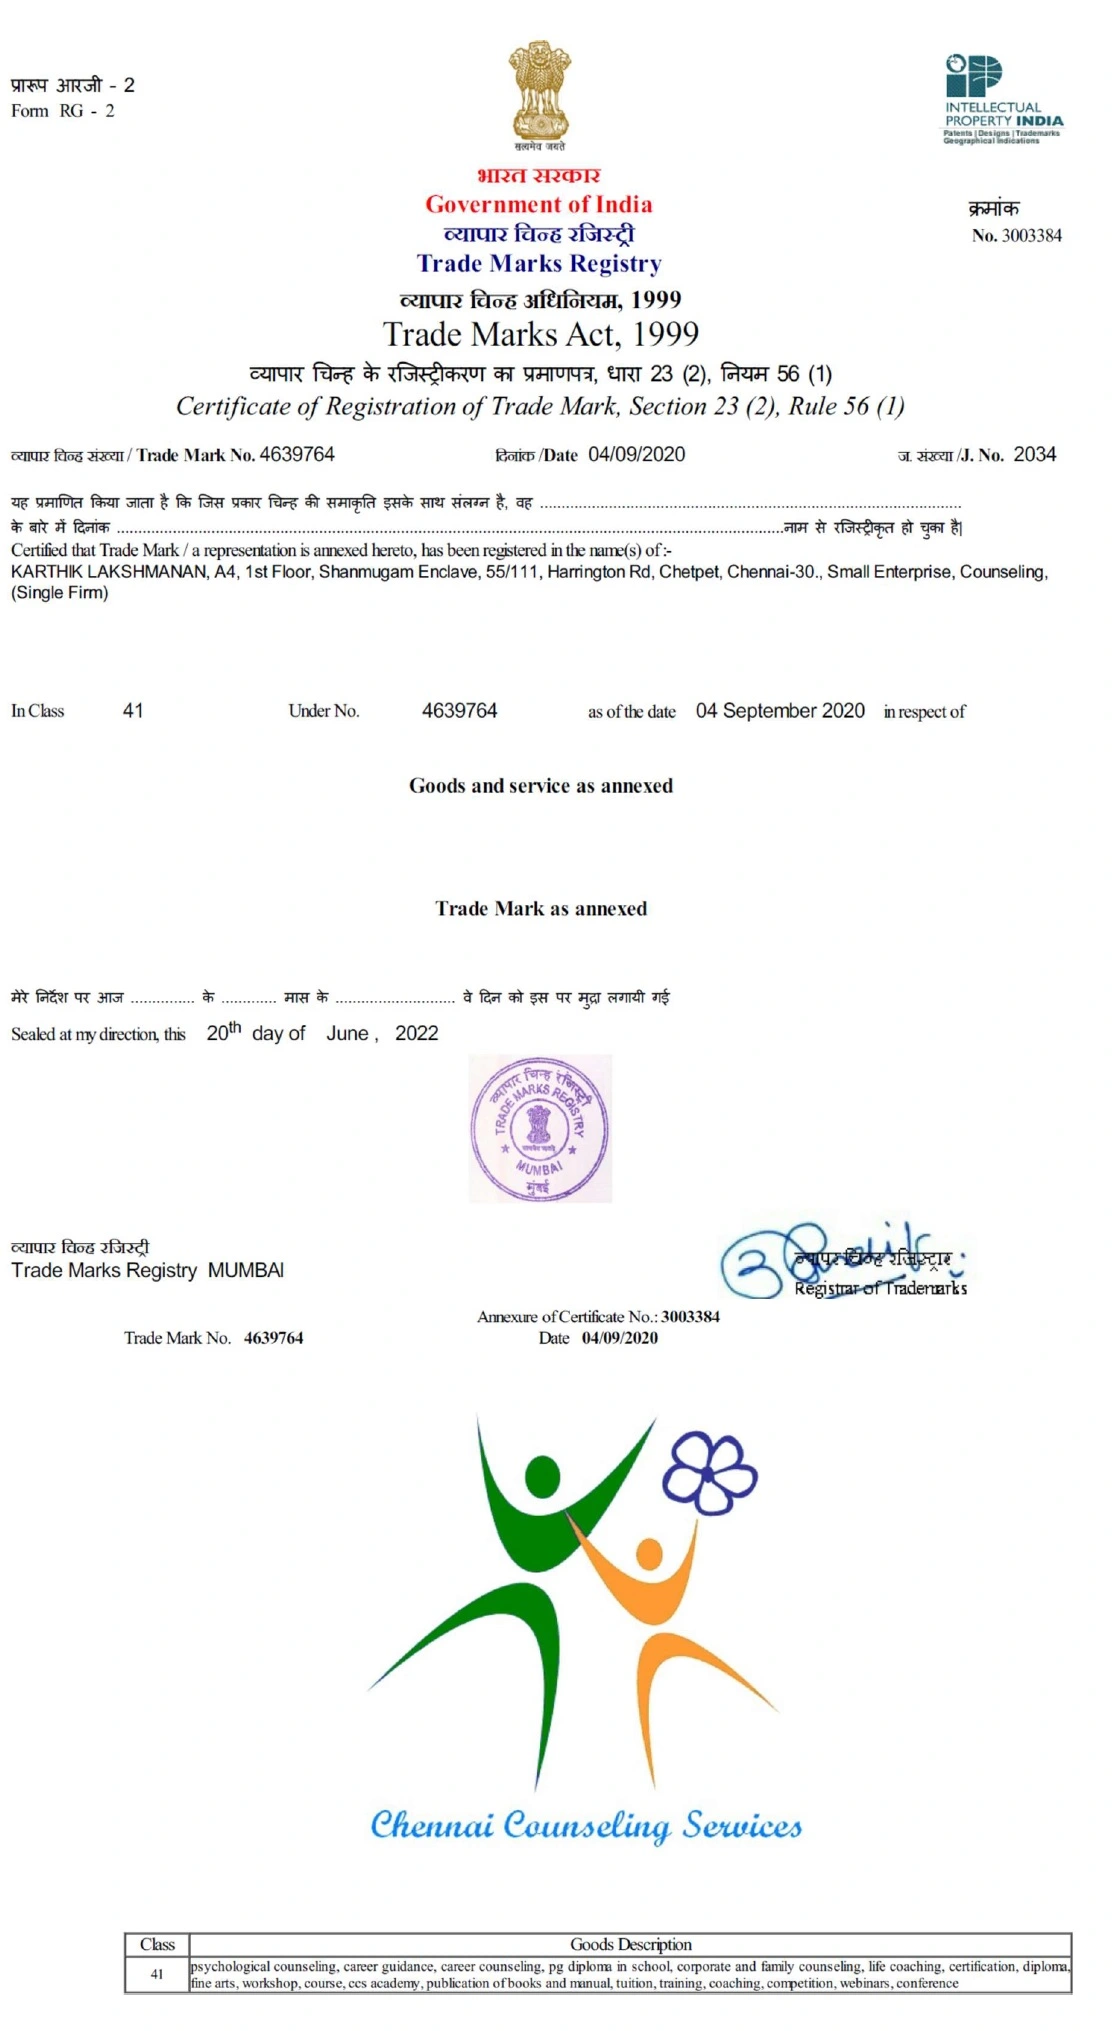 Trademark certificate-About us